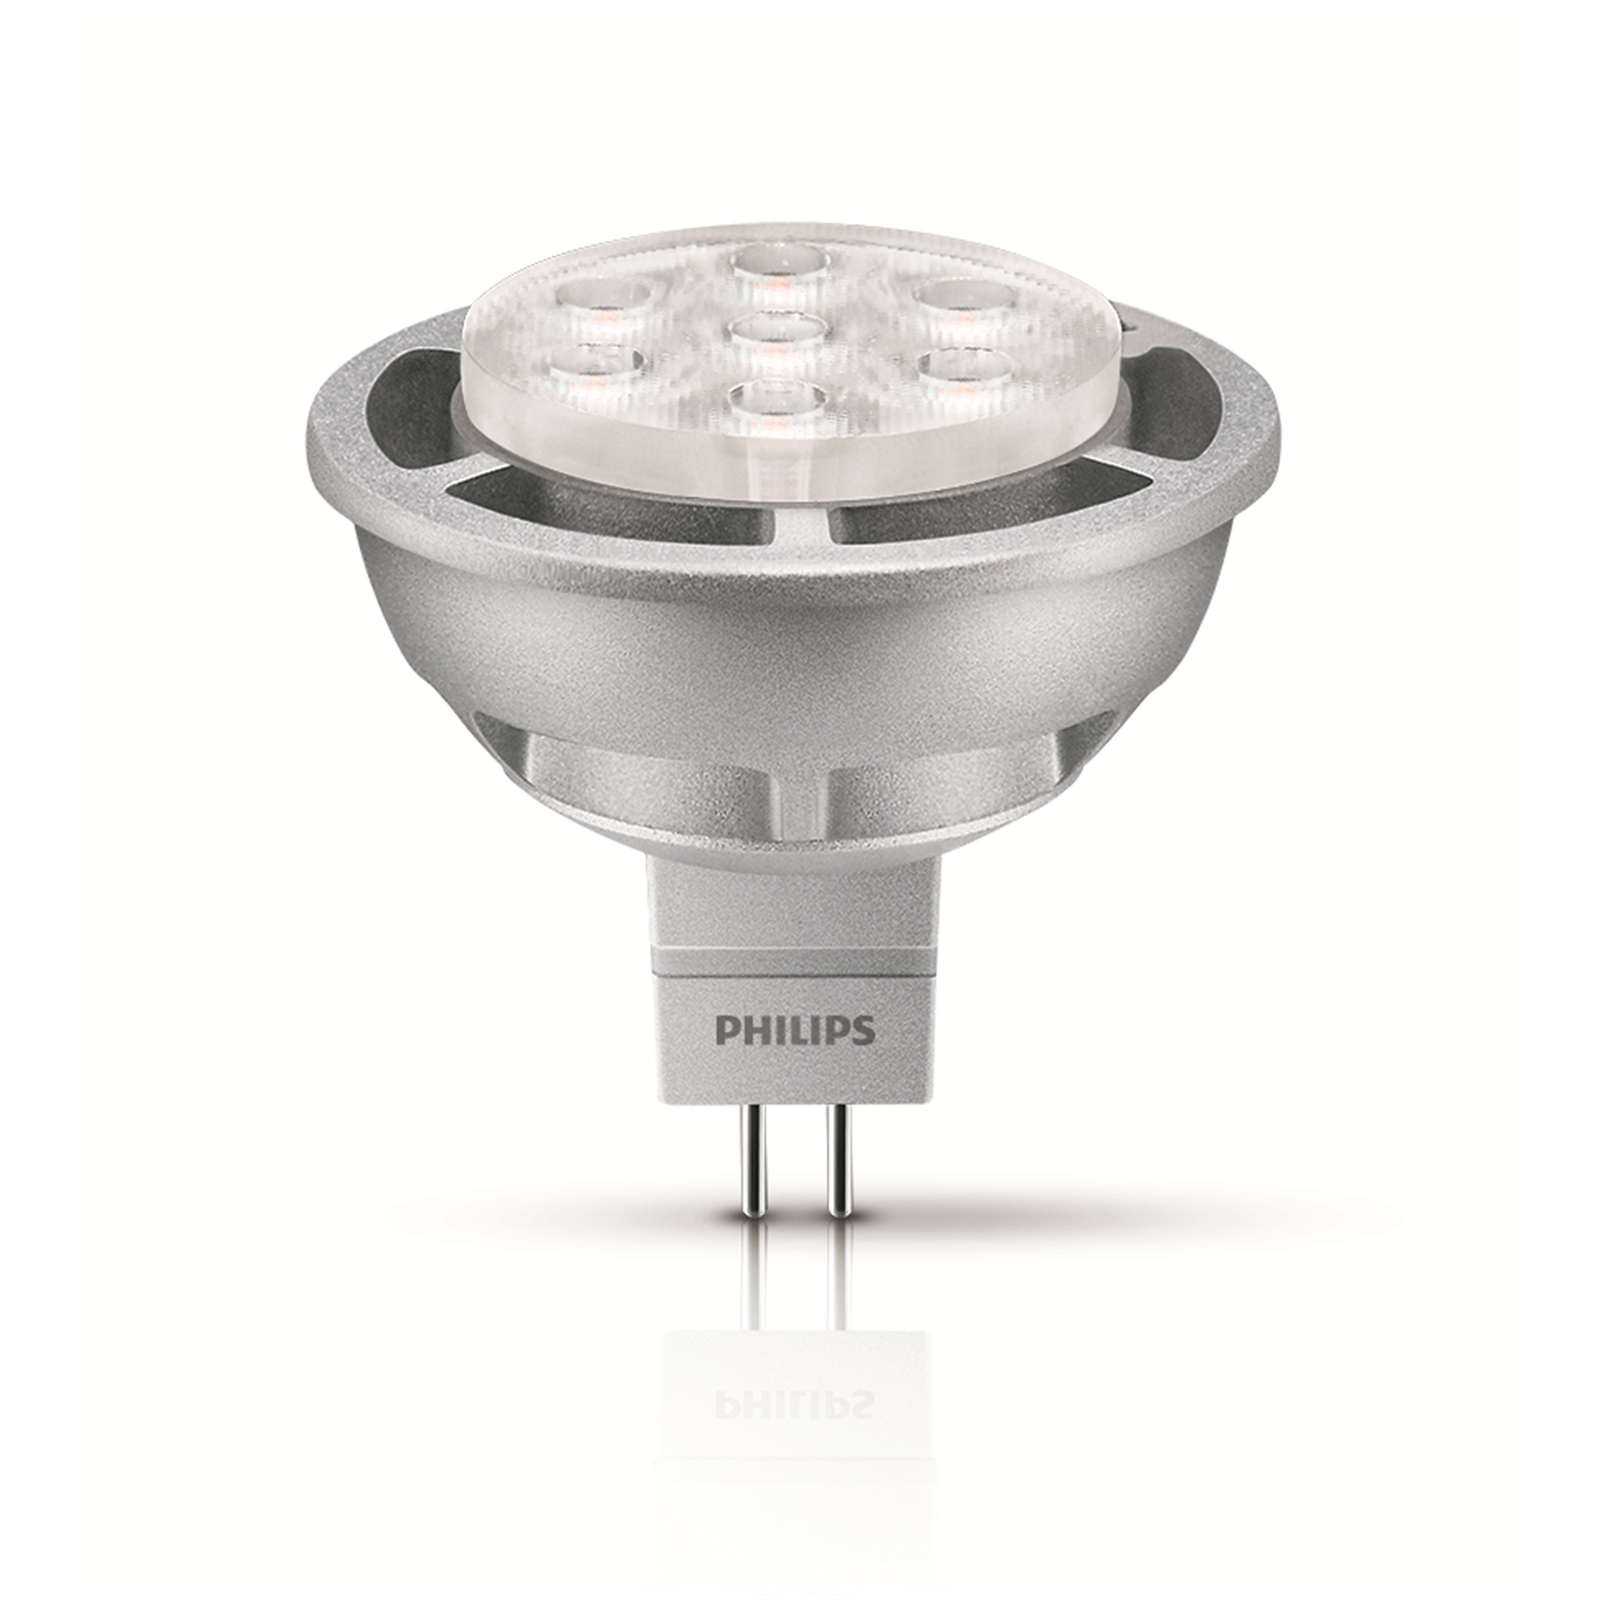 Philips Mr16 8w 60d 650L Dimmable LED Globe